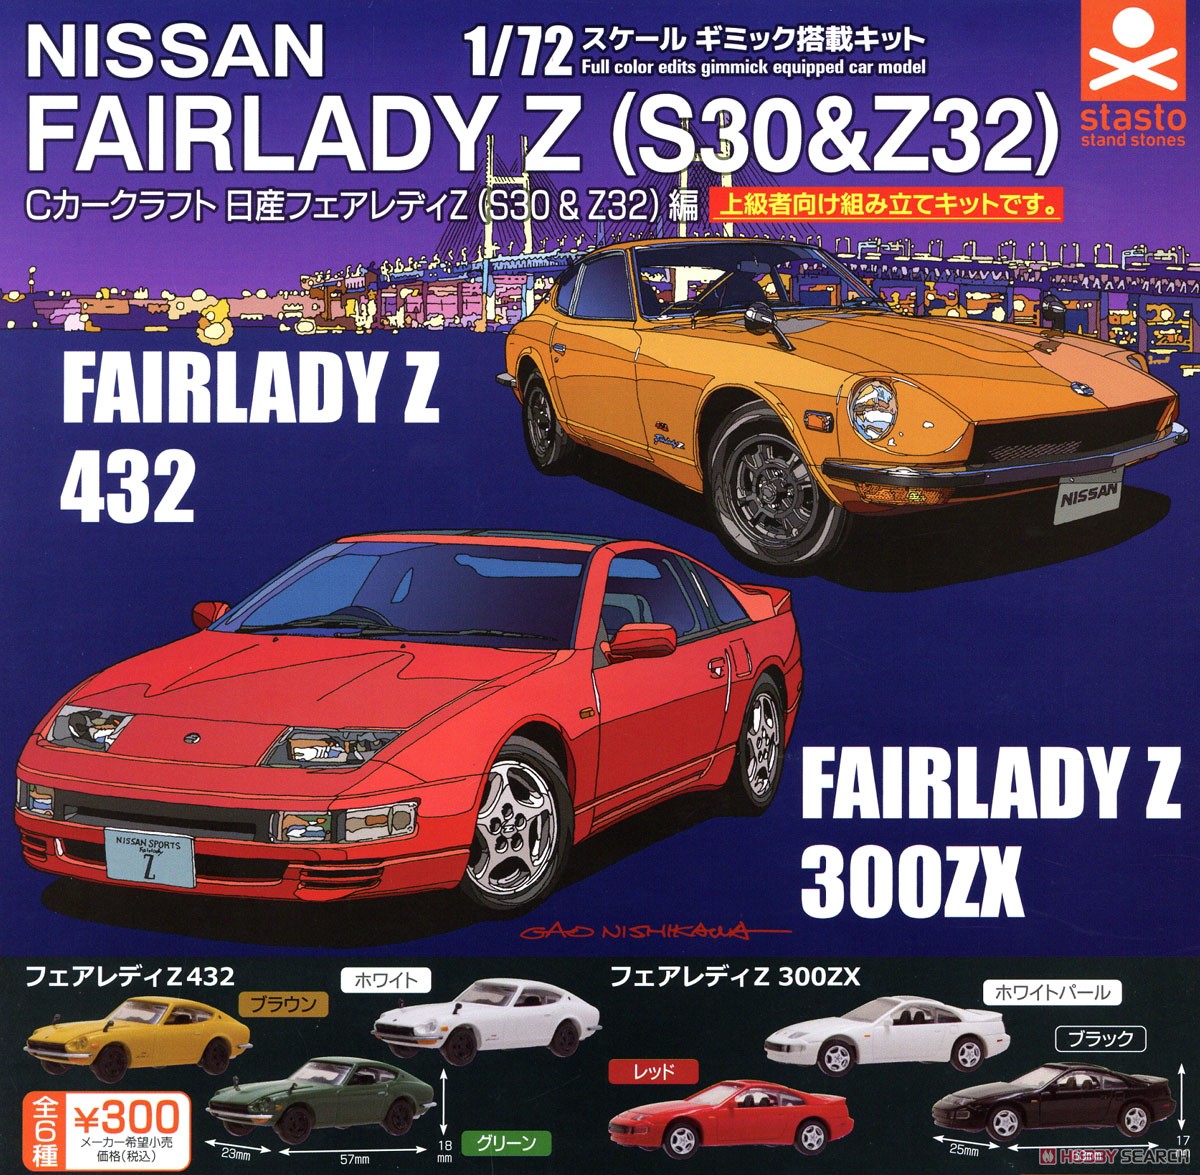 Cカークラフト 日産フェアレディZ (S30&Z32)編 (玩具) その他の画像1